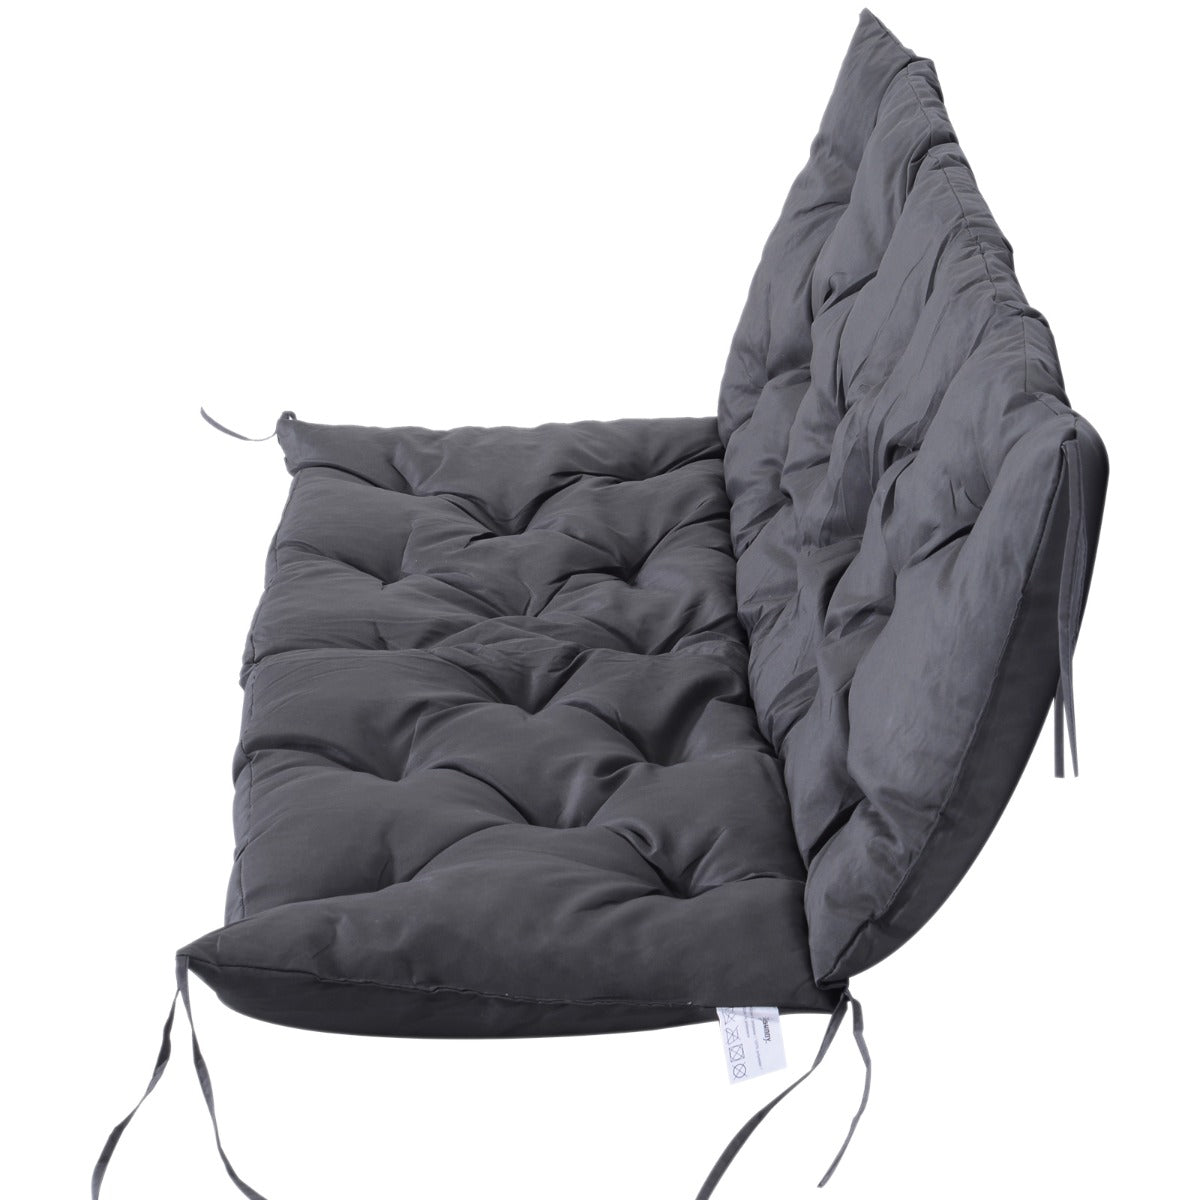 Outsunny Oxford Fabrics Tufted 3 Seater Swing Chair Cushion Grey